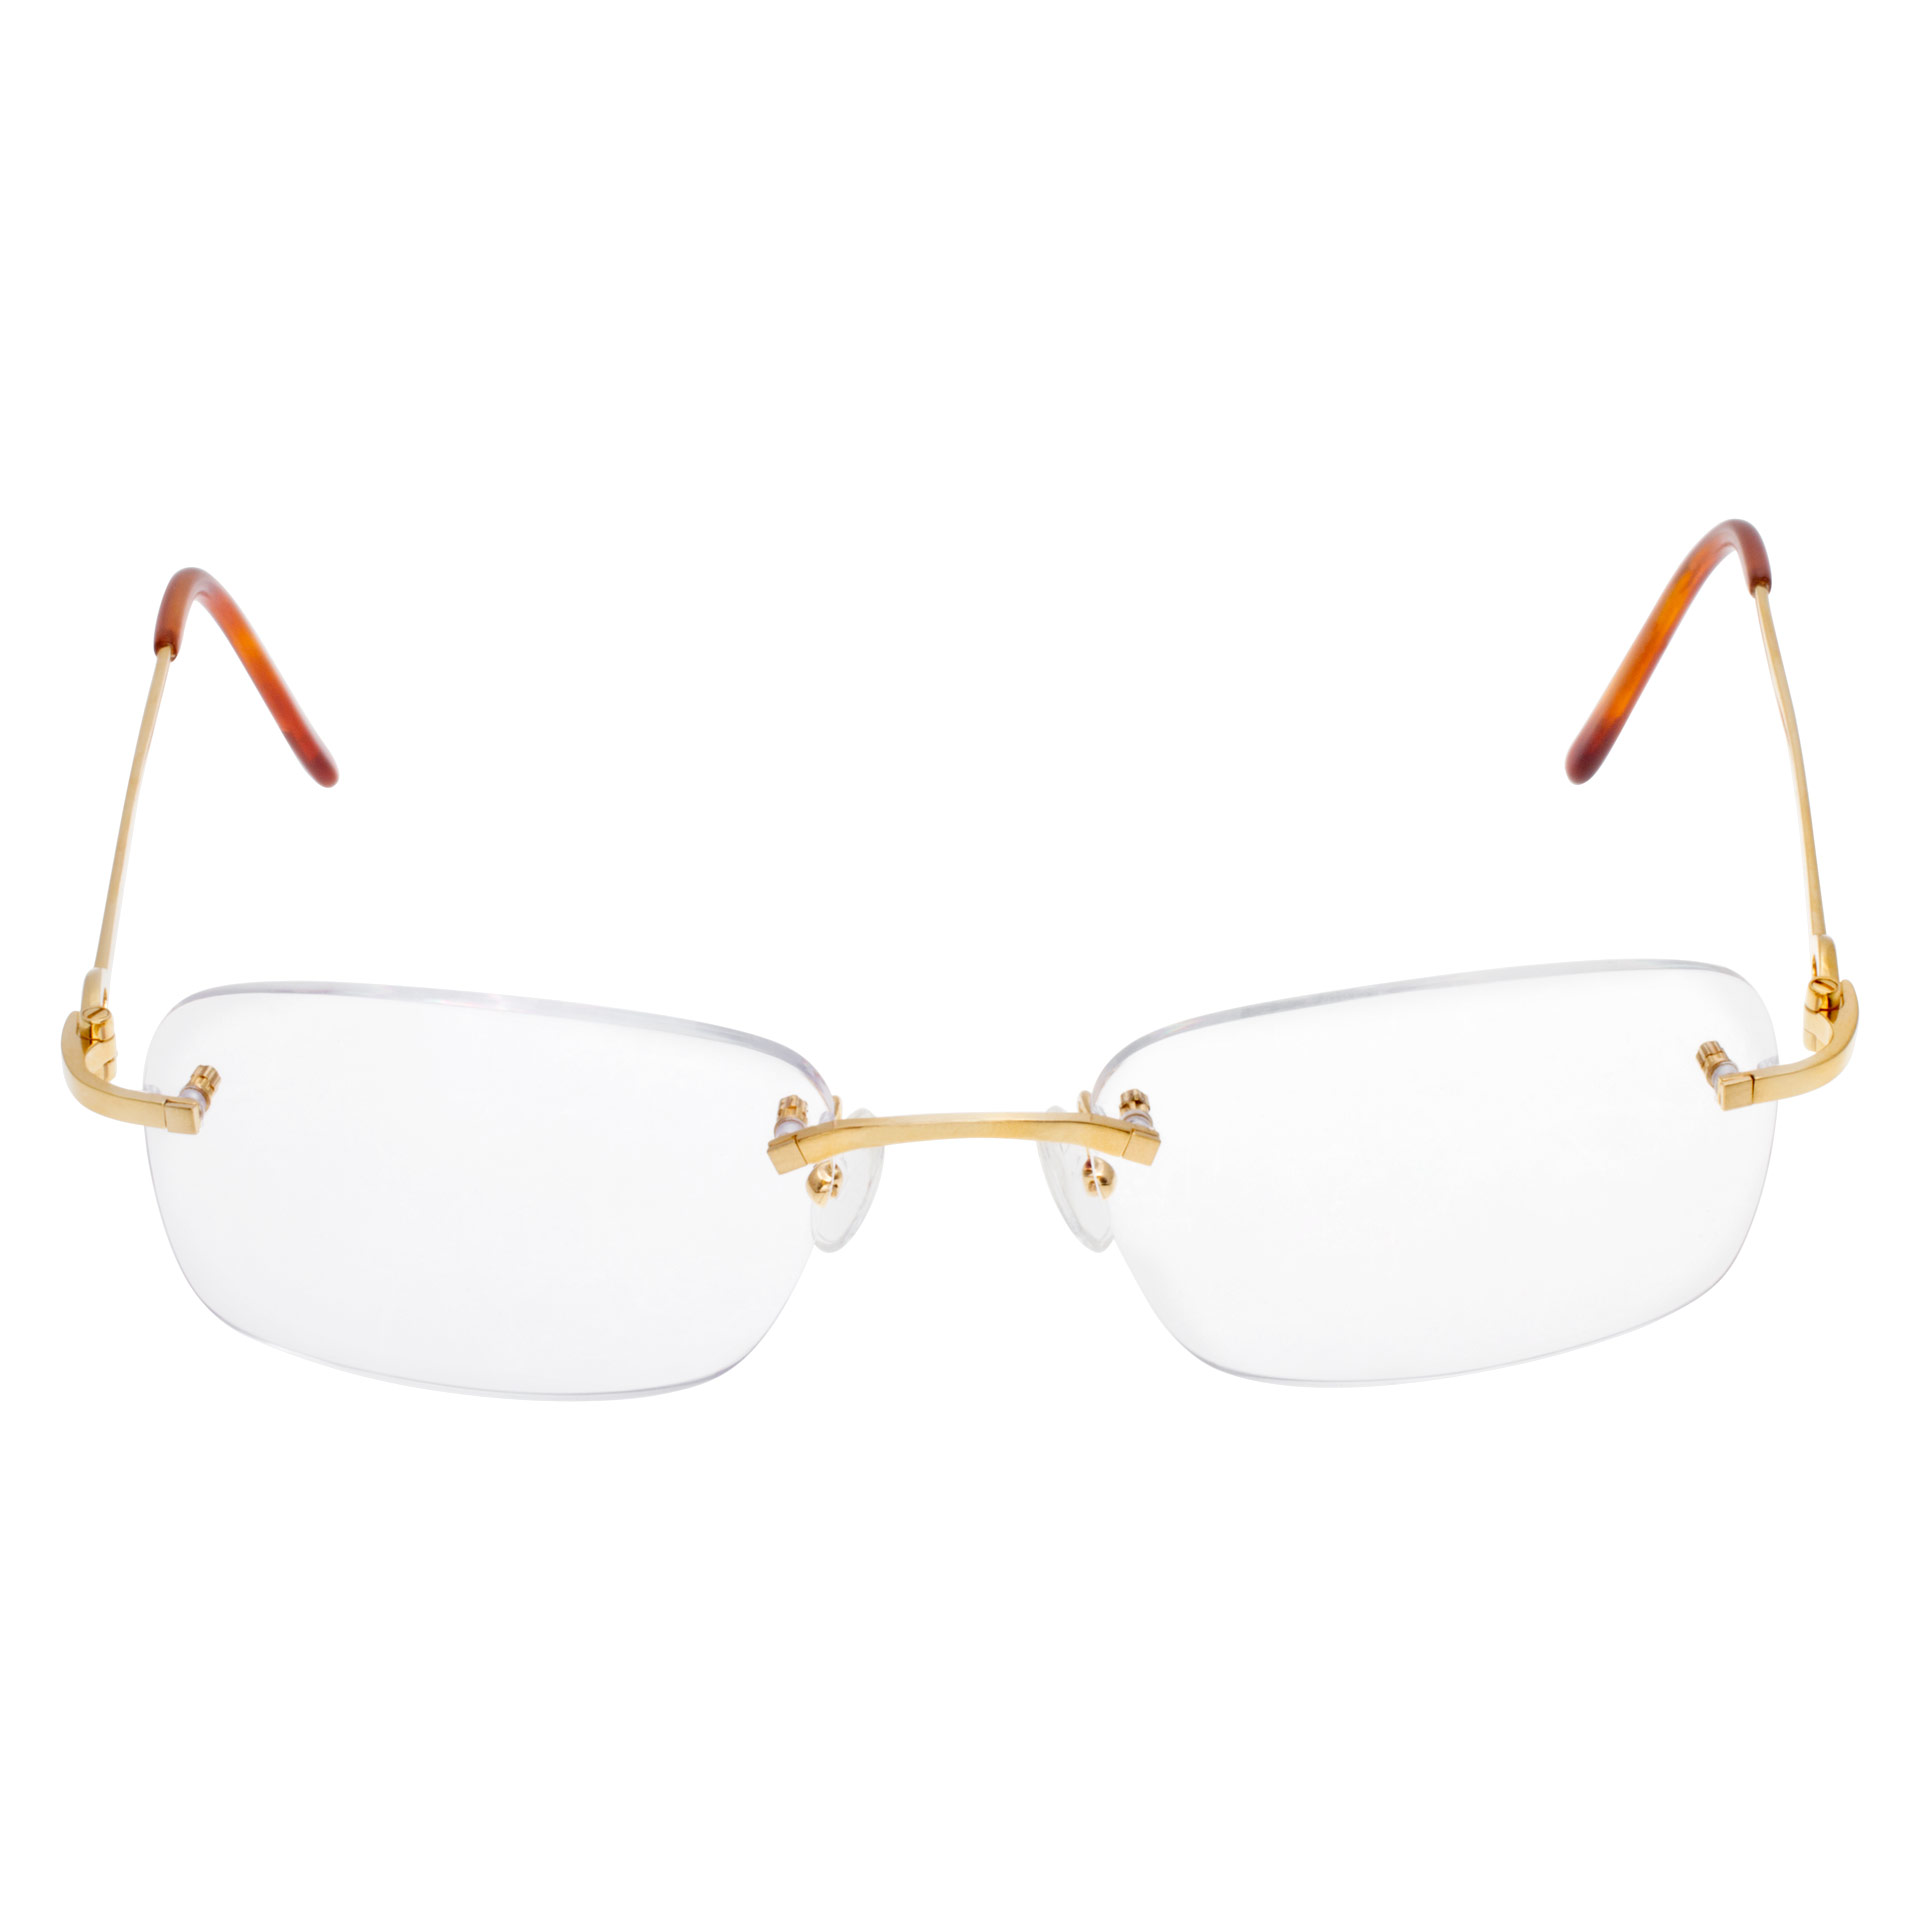 Cartier glasses in 18k gold plated frame. image 2